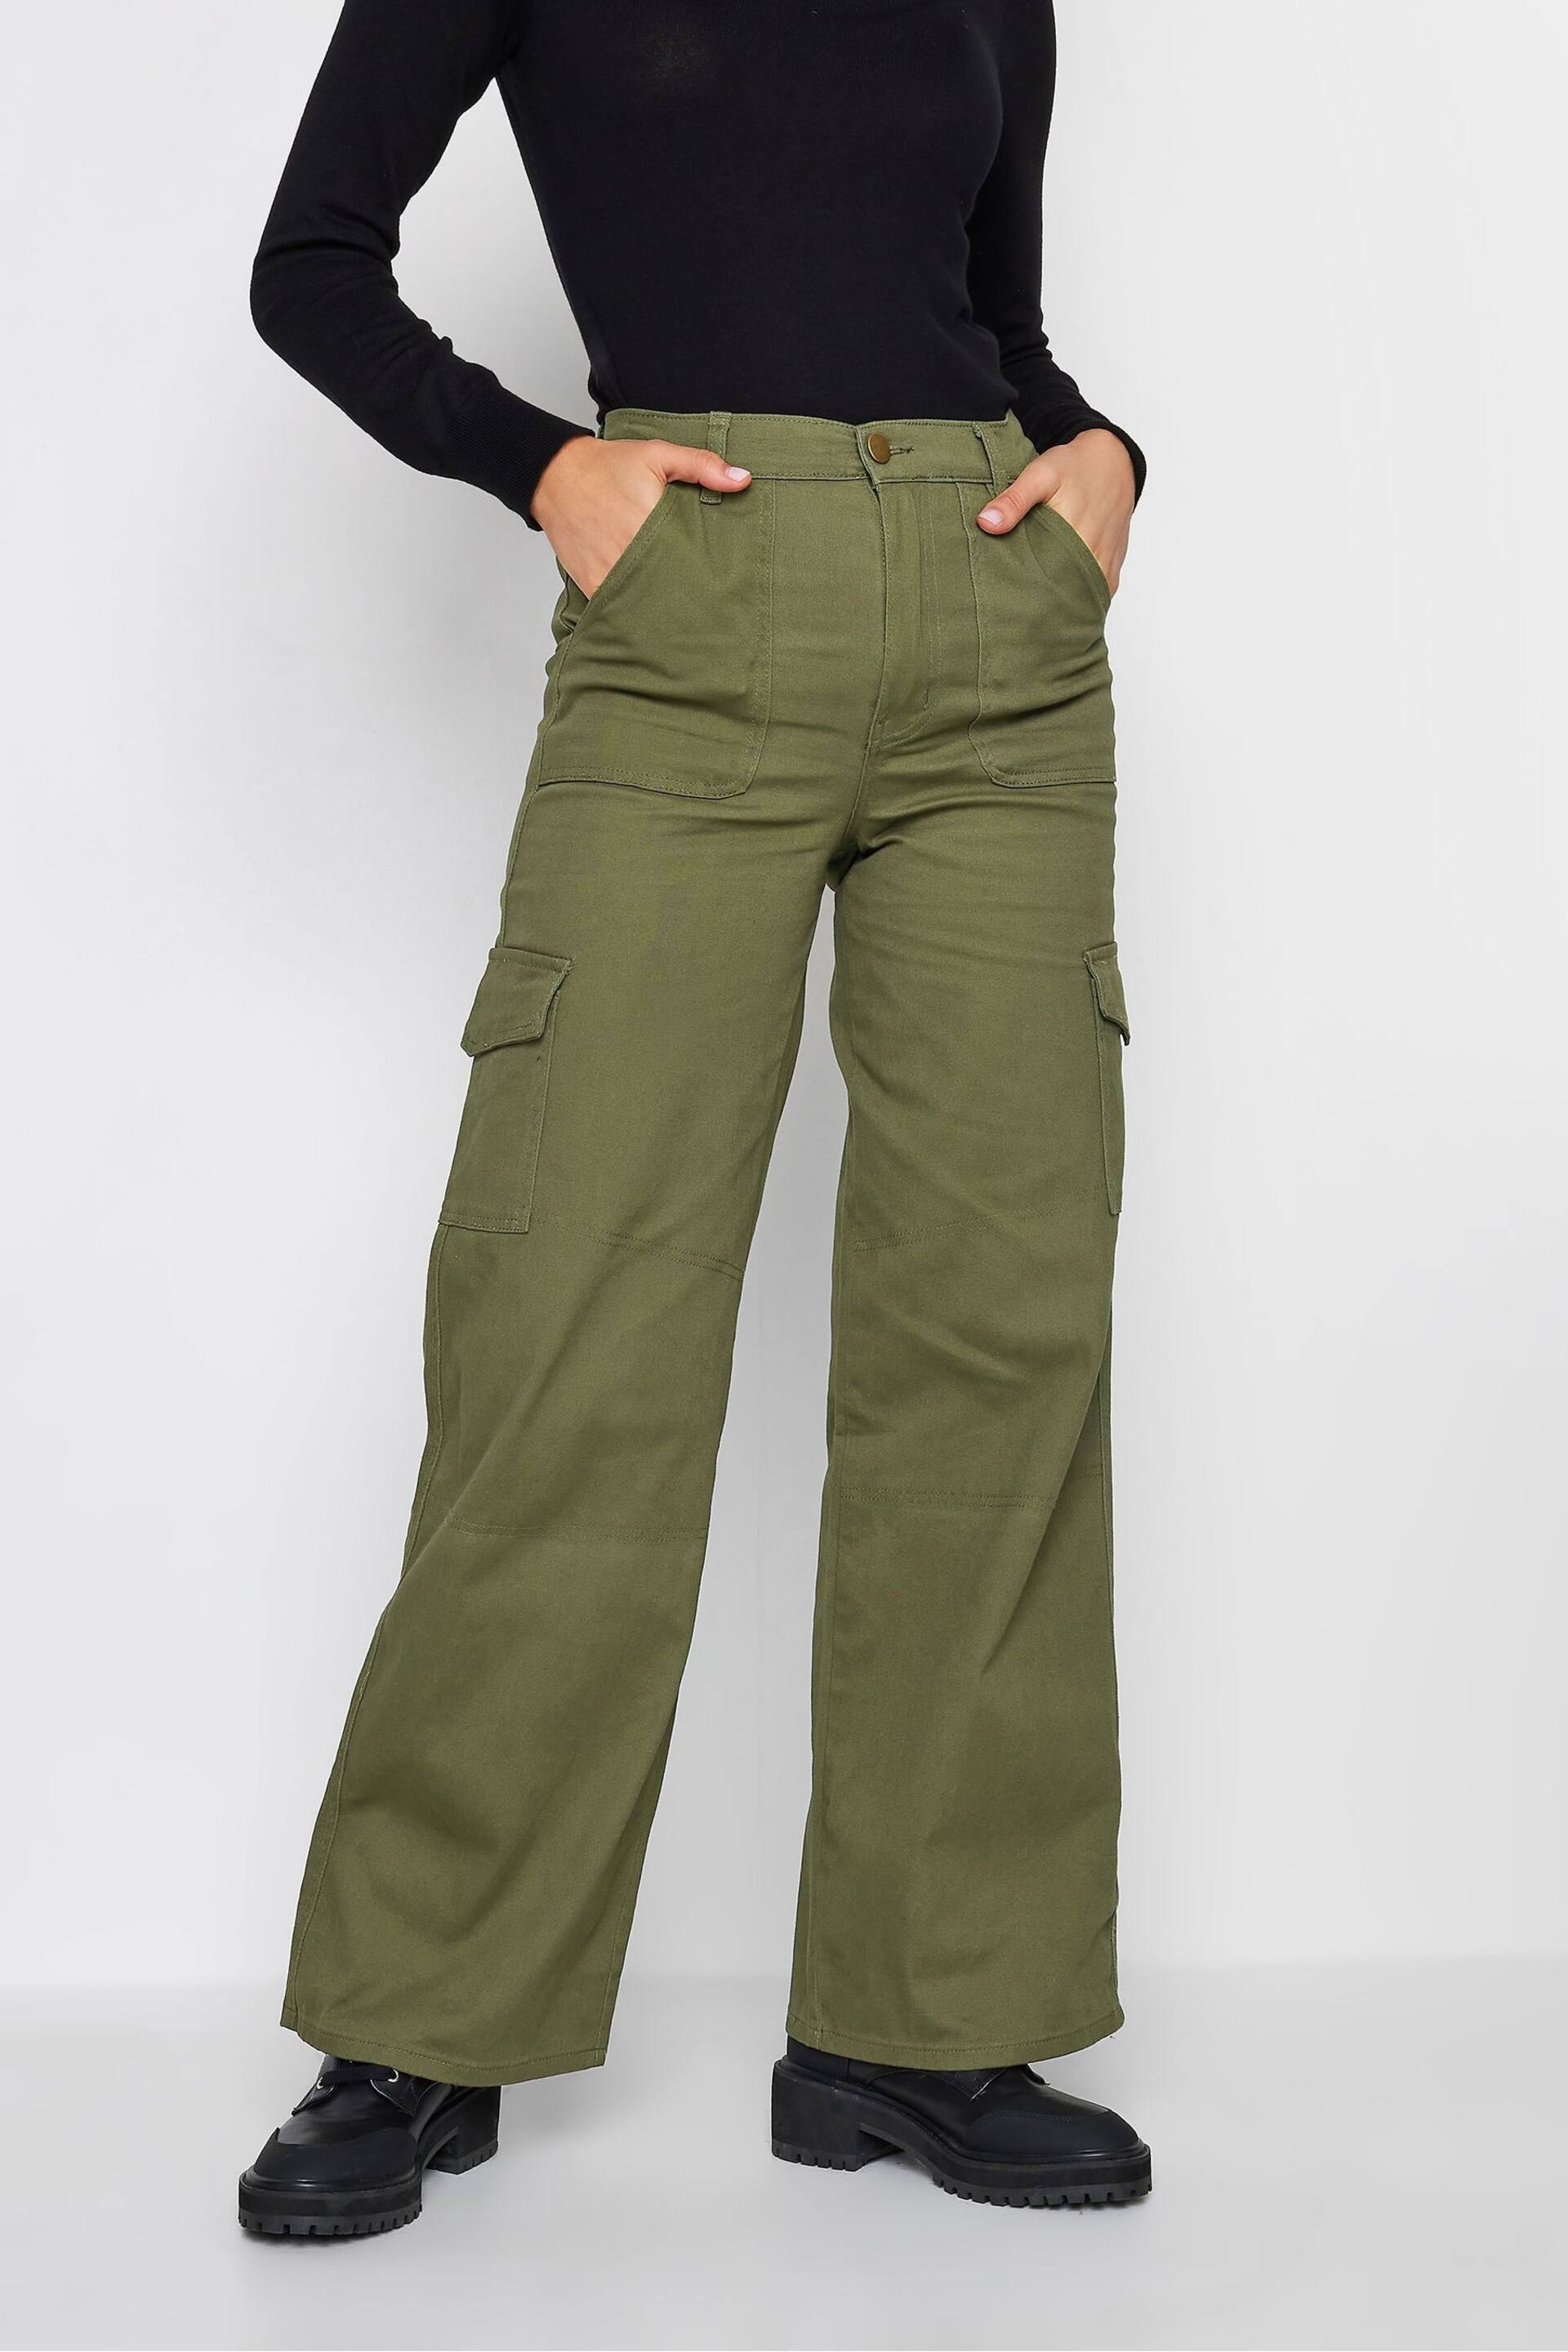 Long Tall Sally Green Loose Utility Trousers - Image 1 of 3